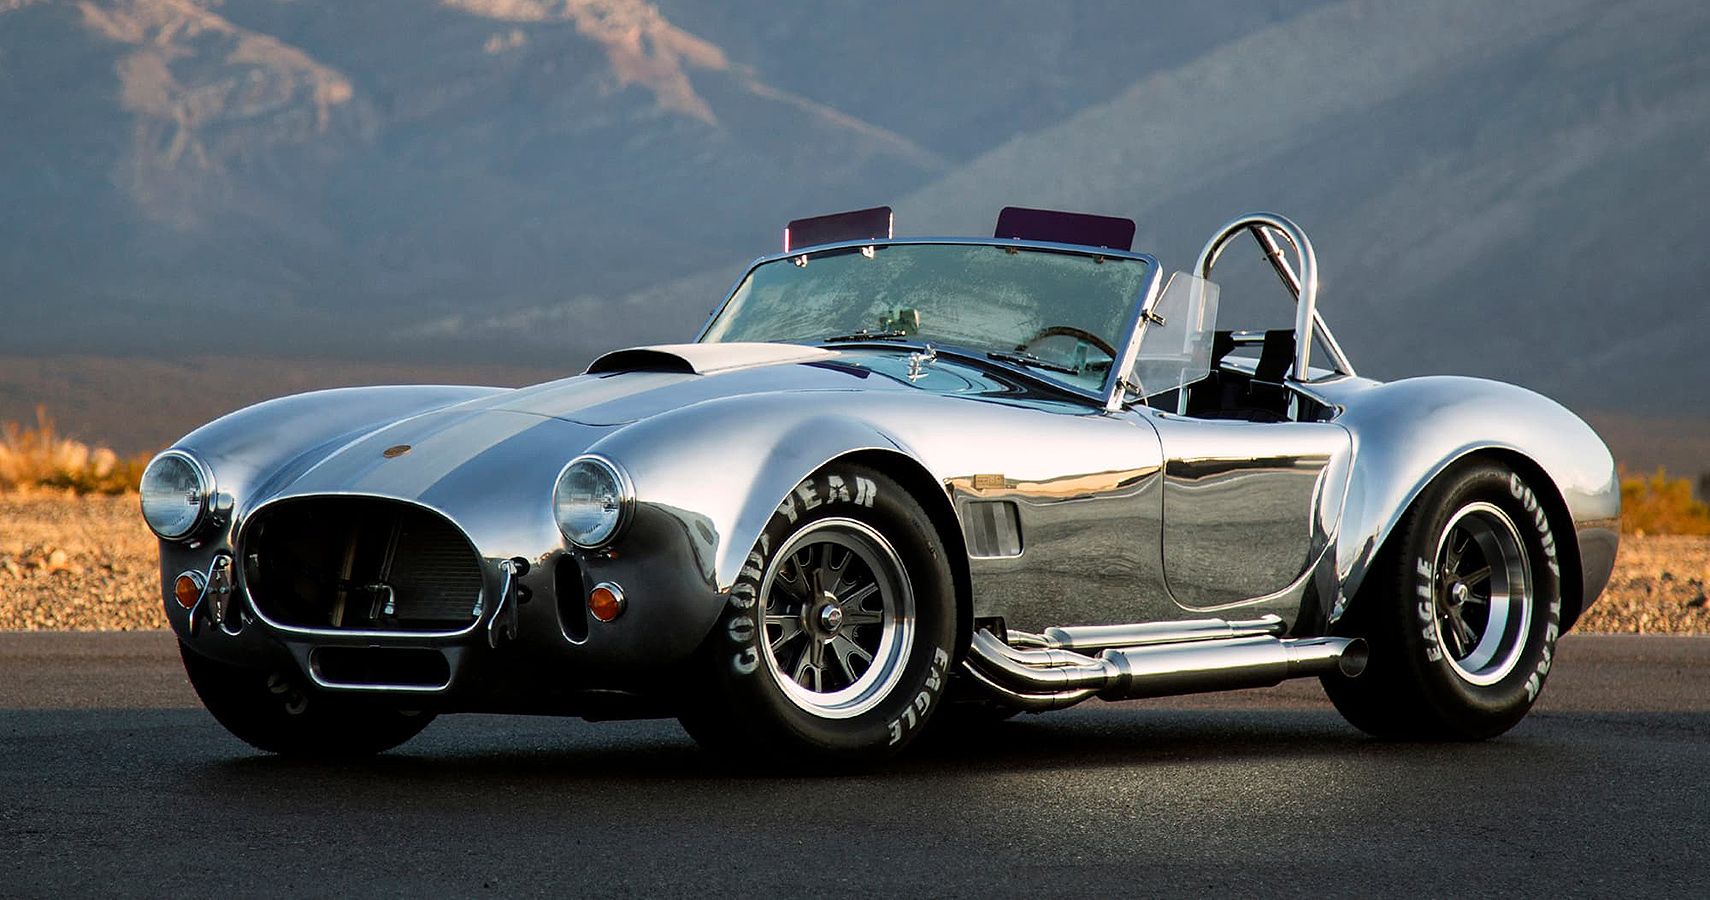 The Cobra 427 Remained America’s Fastest Car For Years